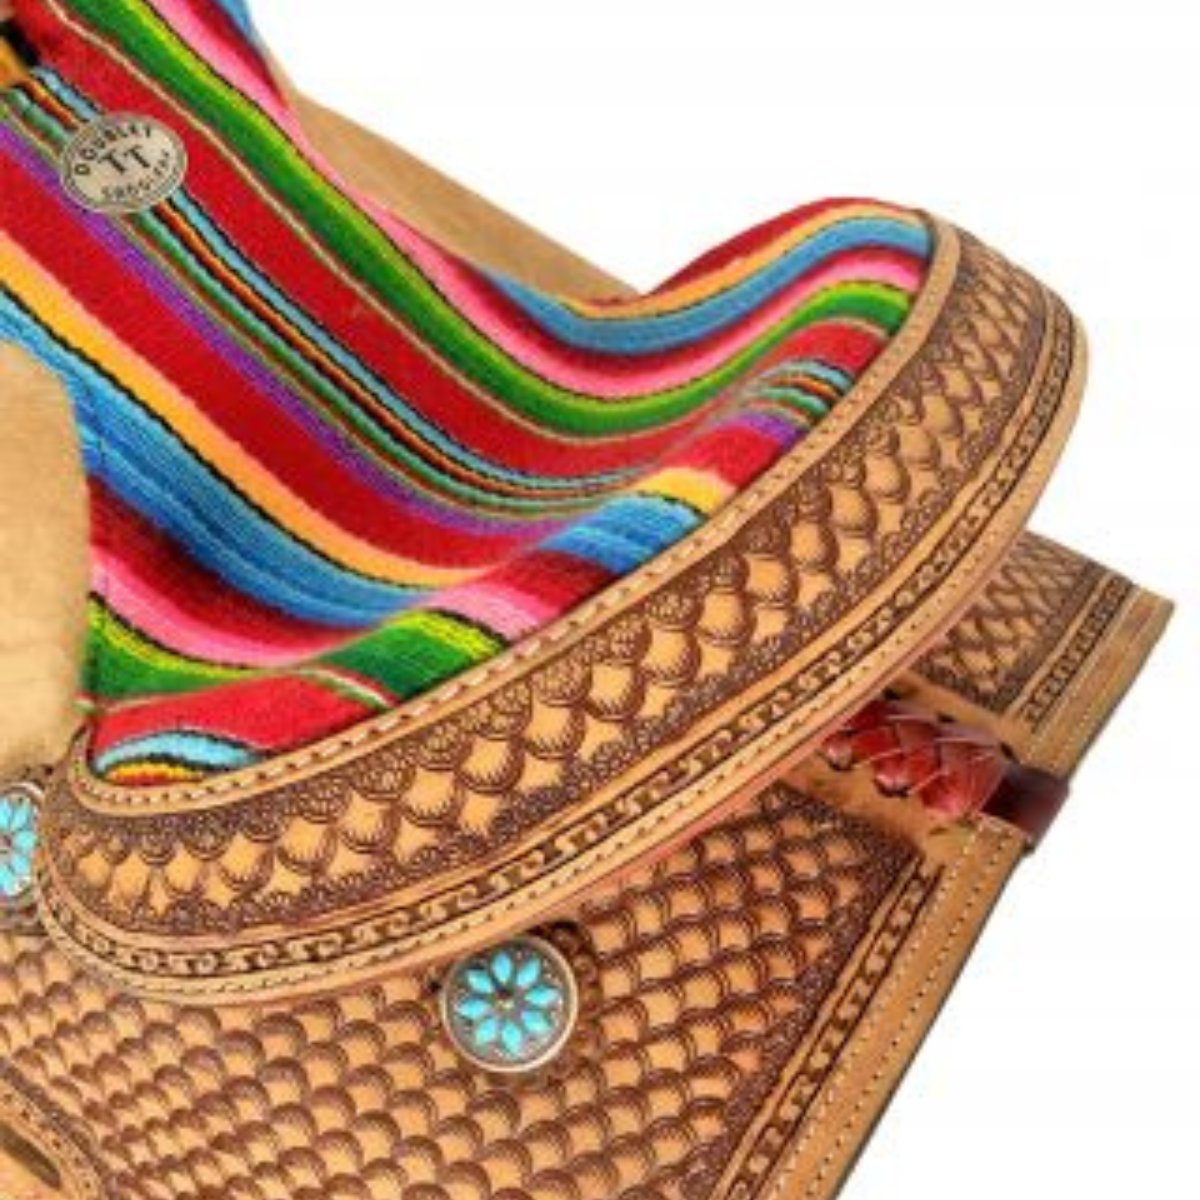 12" Double T  Youth Hard Seat Western saddle with Wool Serape Accents - Double T Saddles